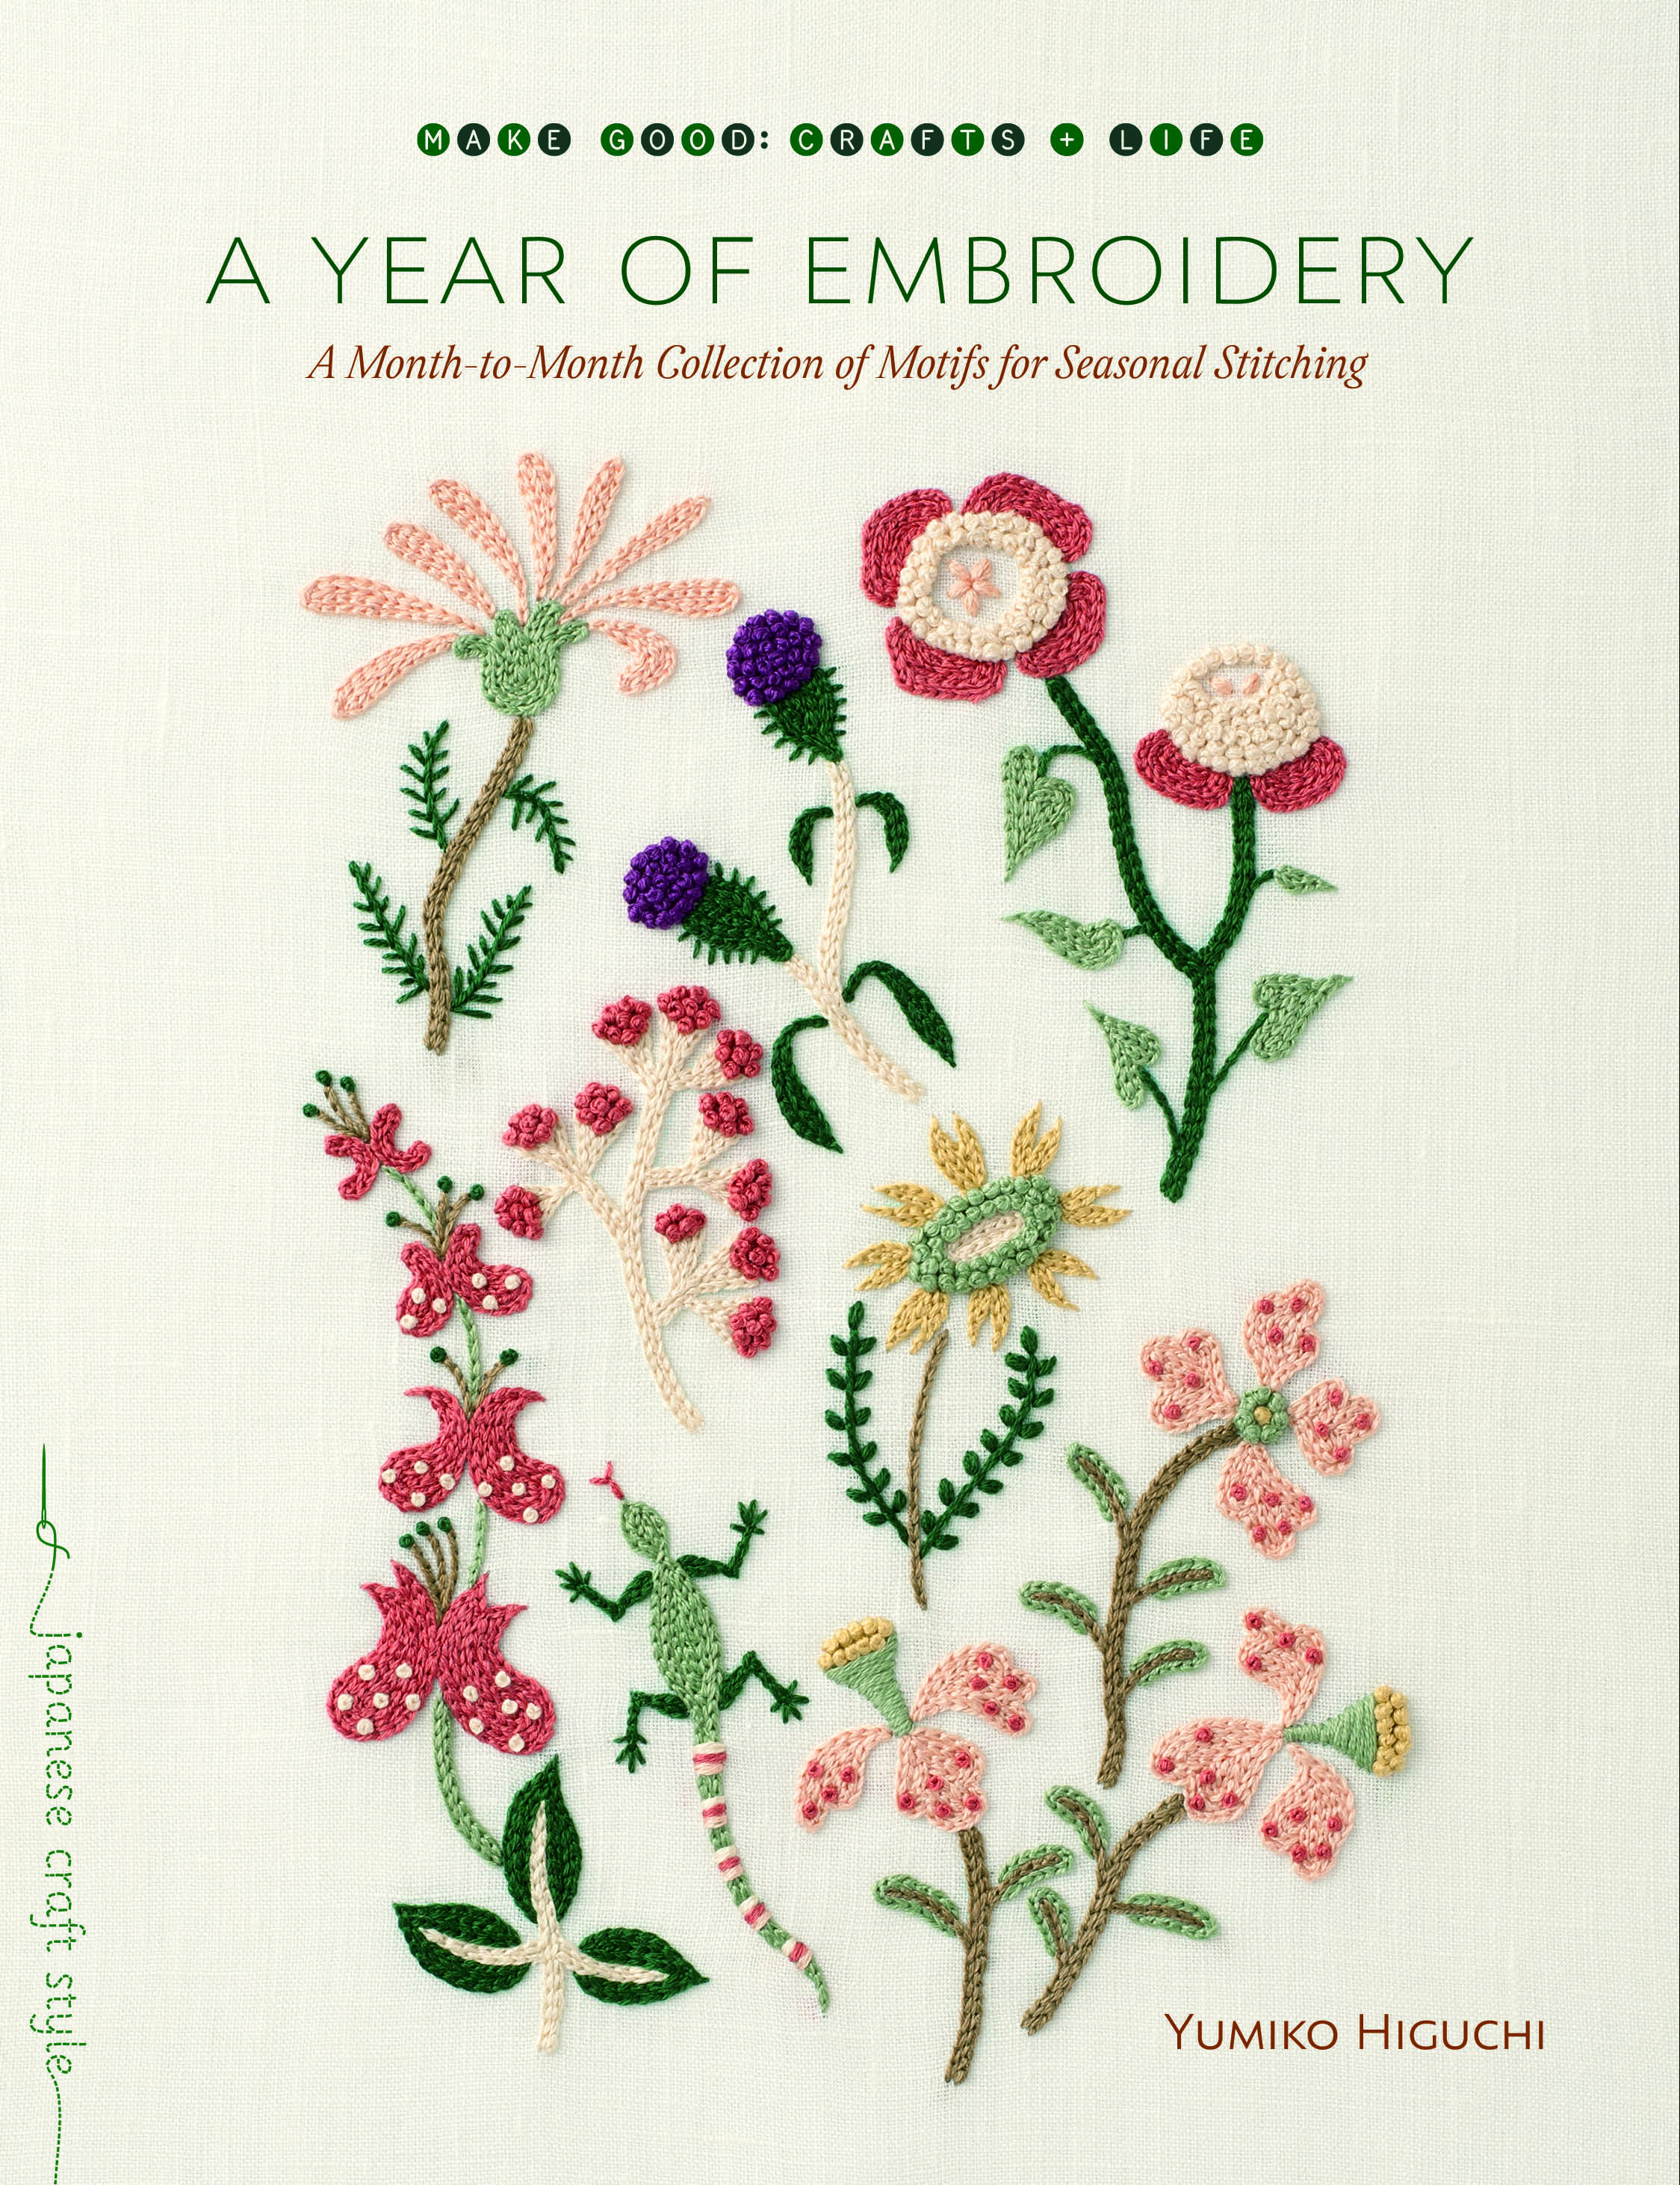 French Embroidery Patterns Diy Floral Cactus Embroidery Projects From A Year Of Embroidery